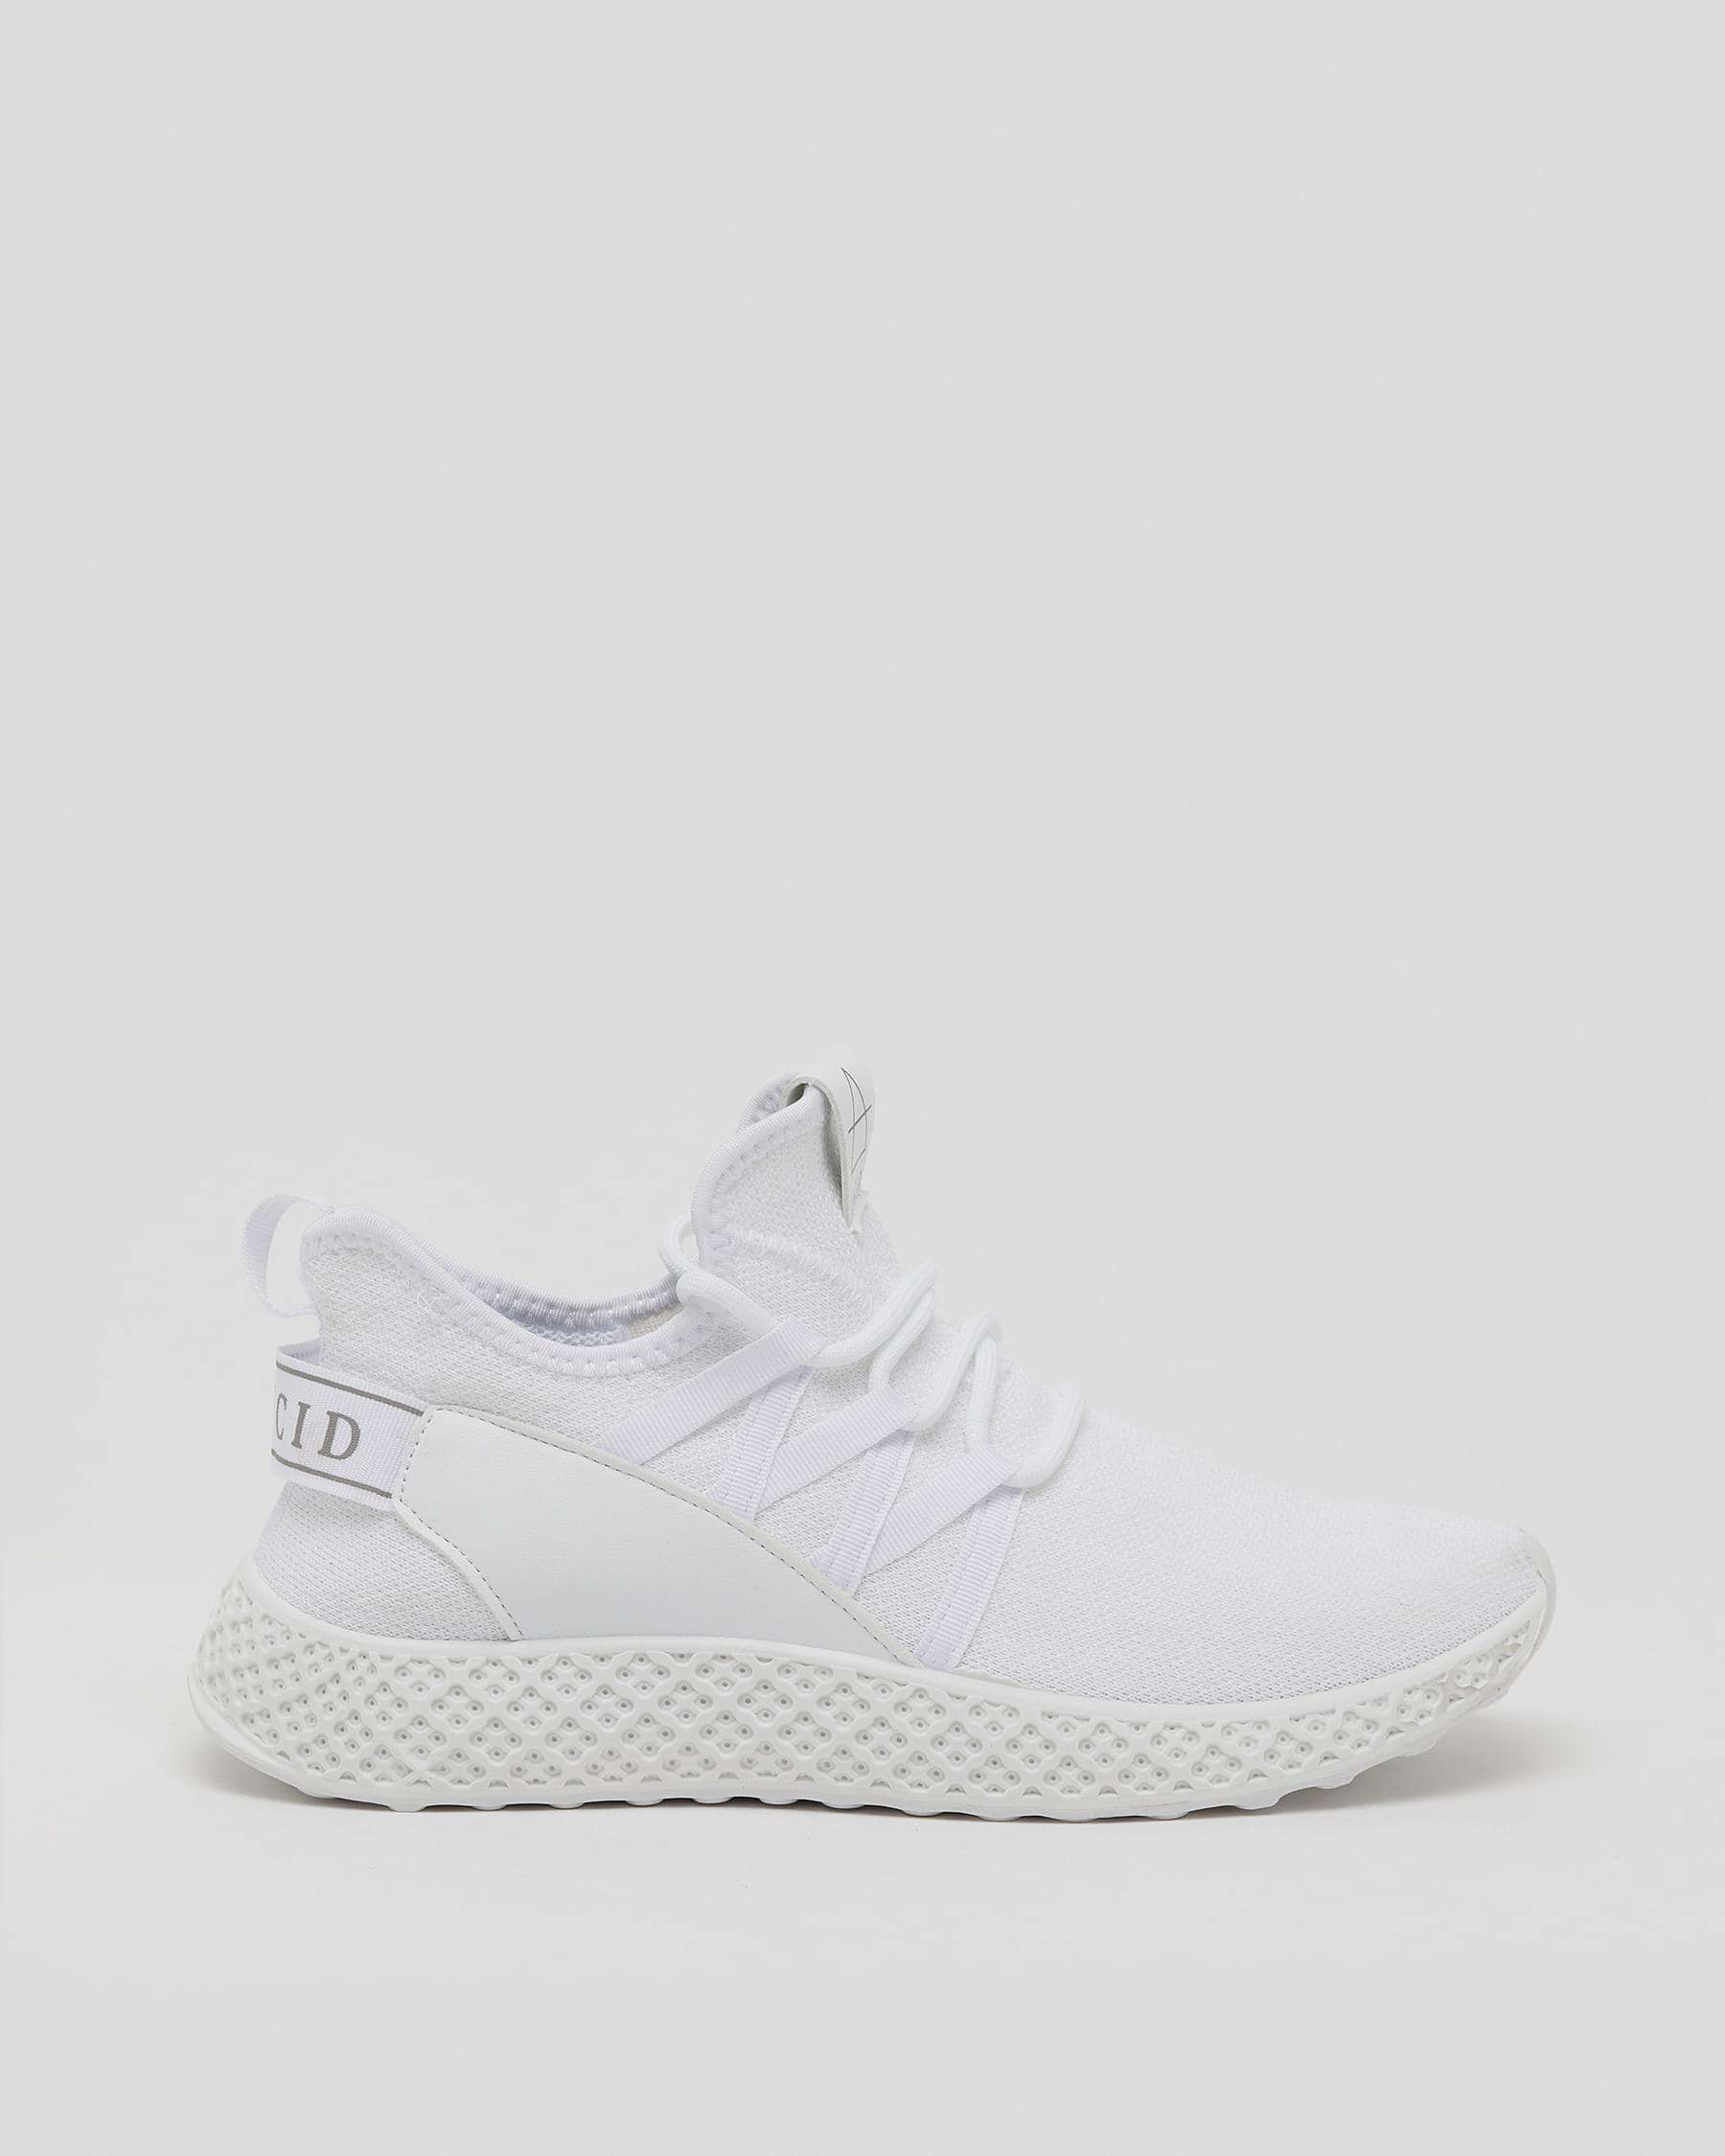 Lucid Bolton Shoes In White/white/white - Fast Shipping & Easy Returns ...